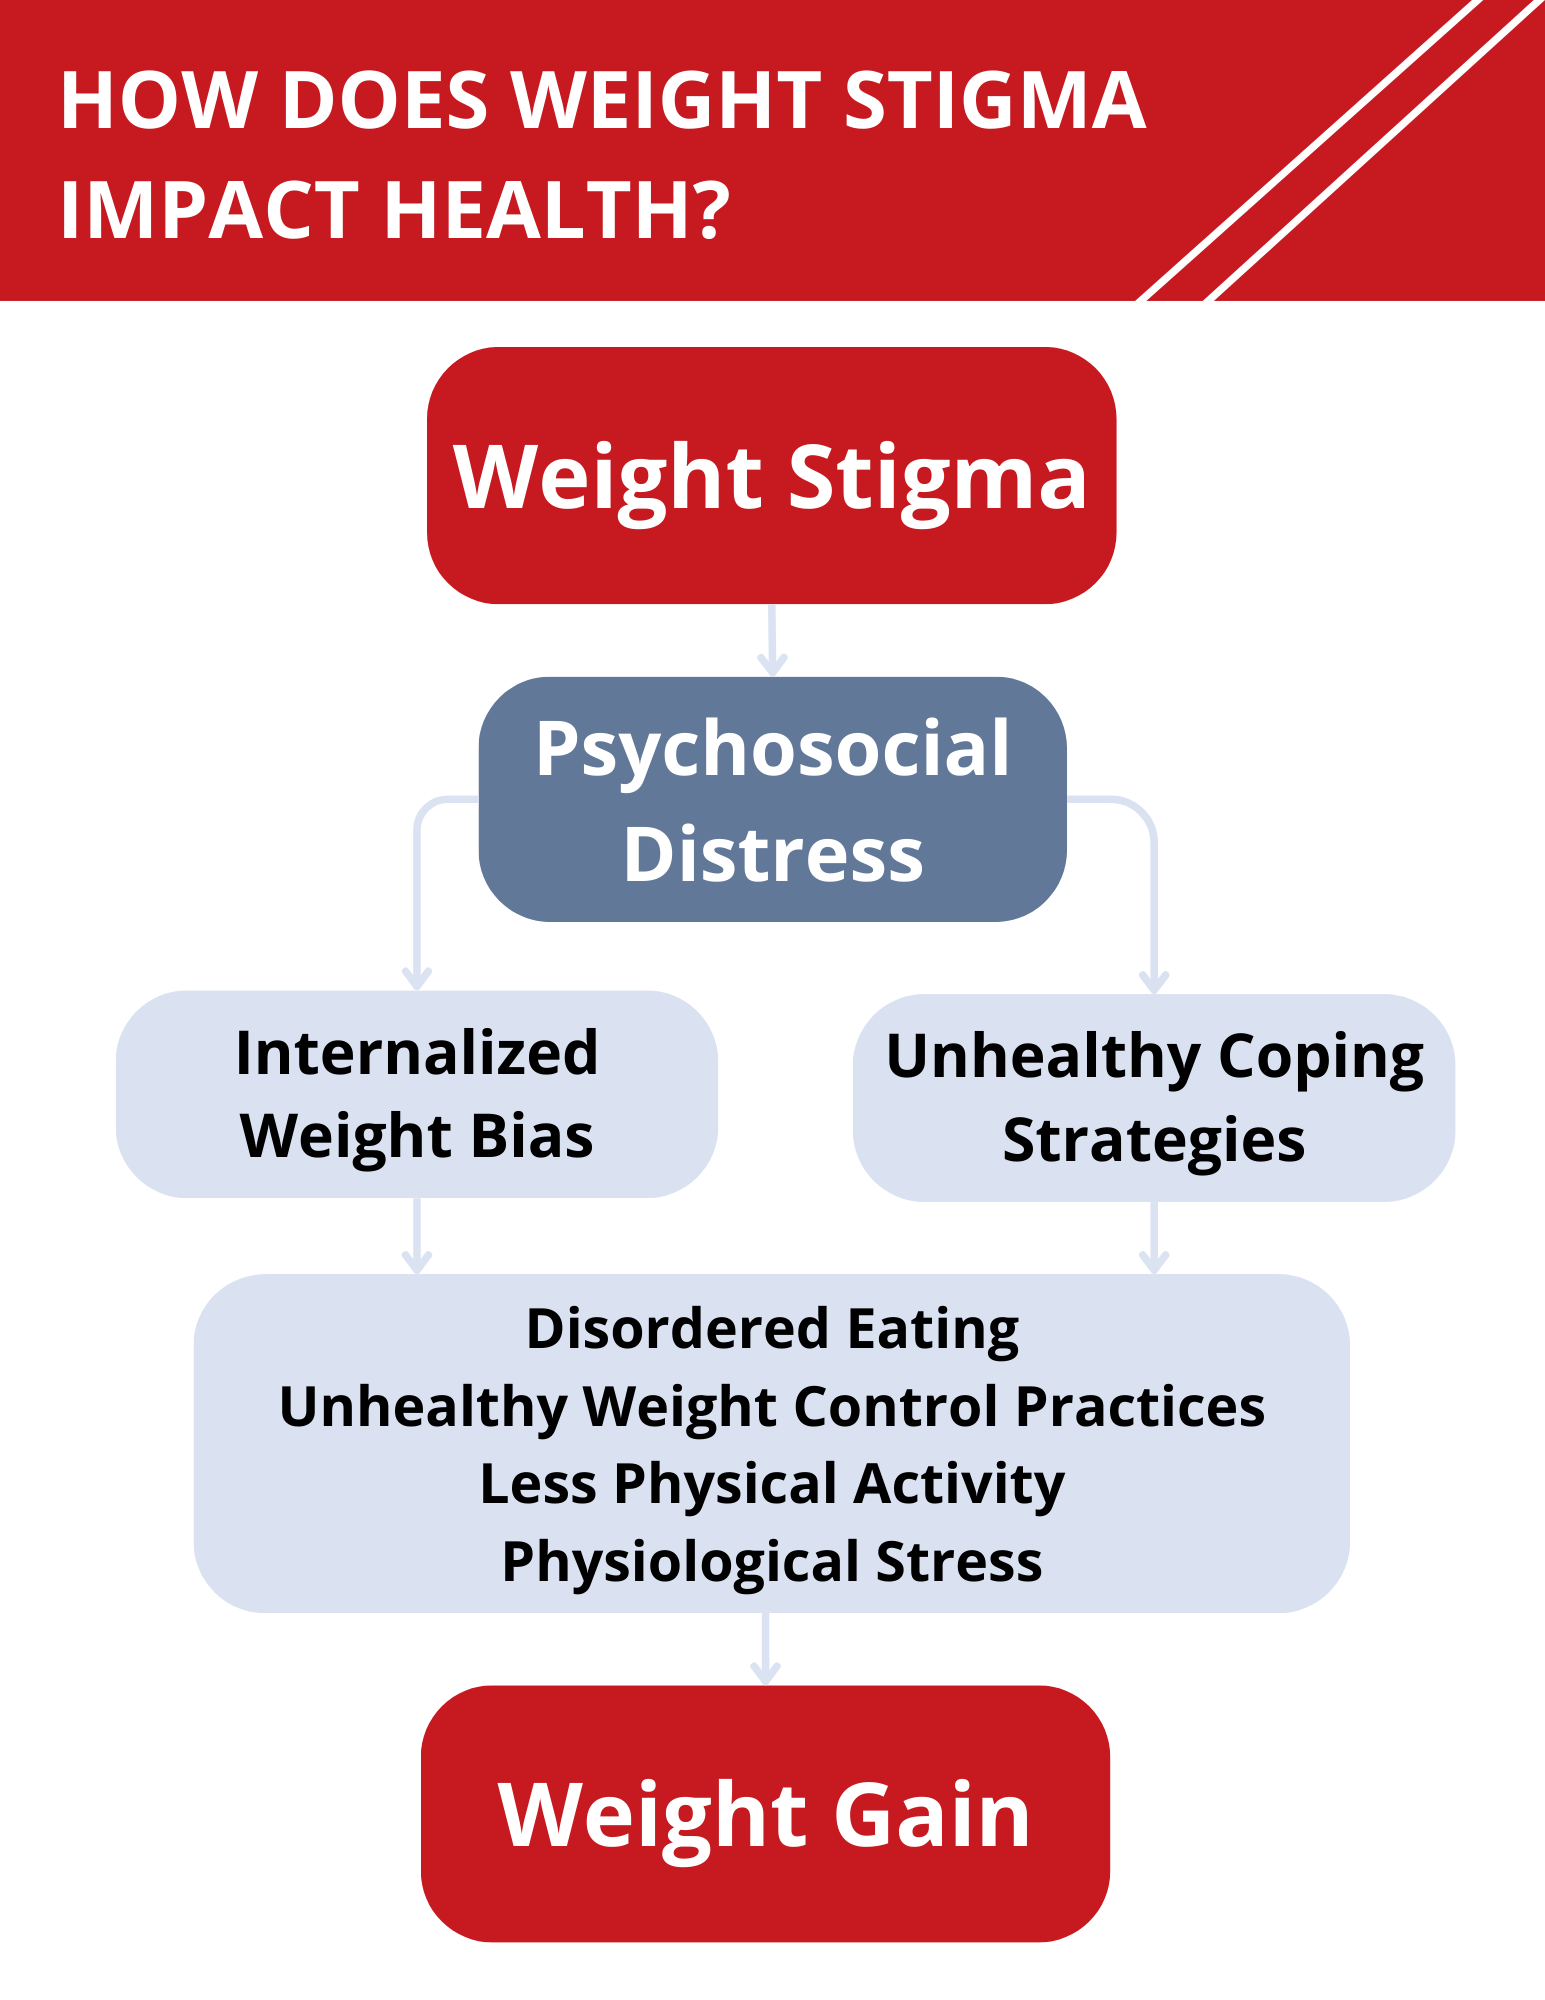 Handout showing that being shamed about weight increases risk of psychological and physical effects